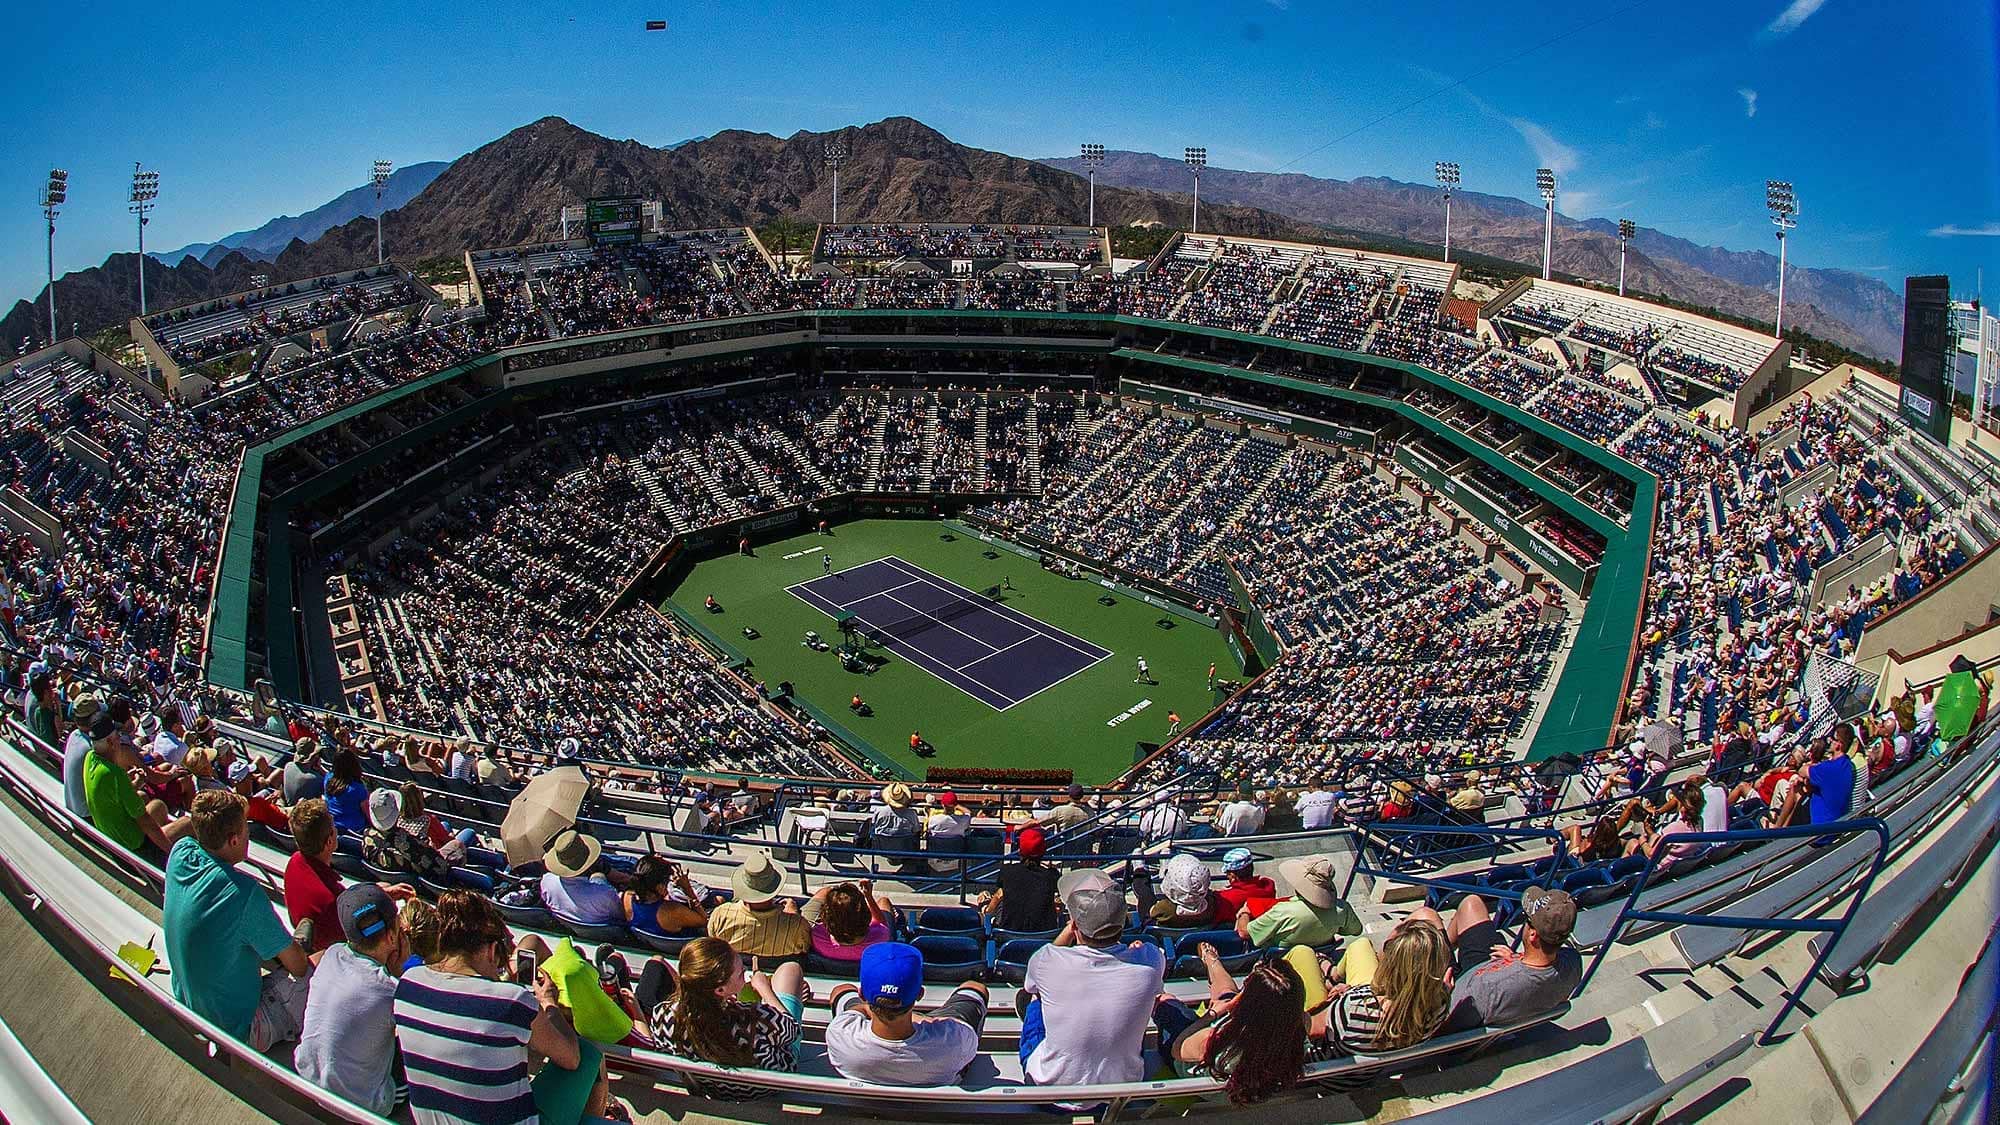 Indian Wells, Dubai & LondonQueen's Voted 2014 ATP World Tour